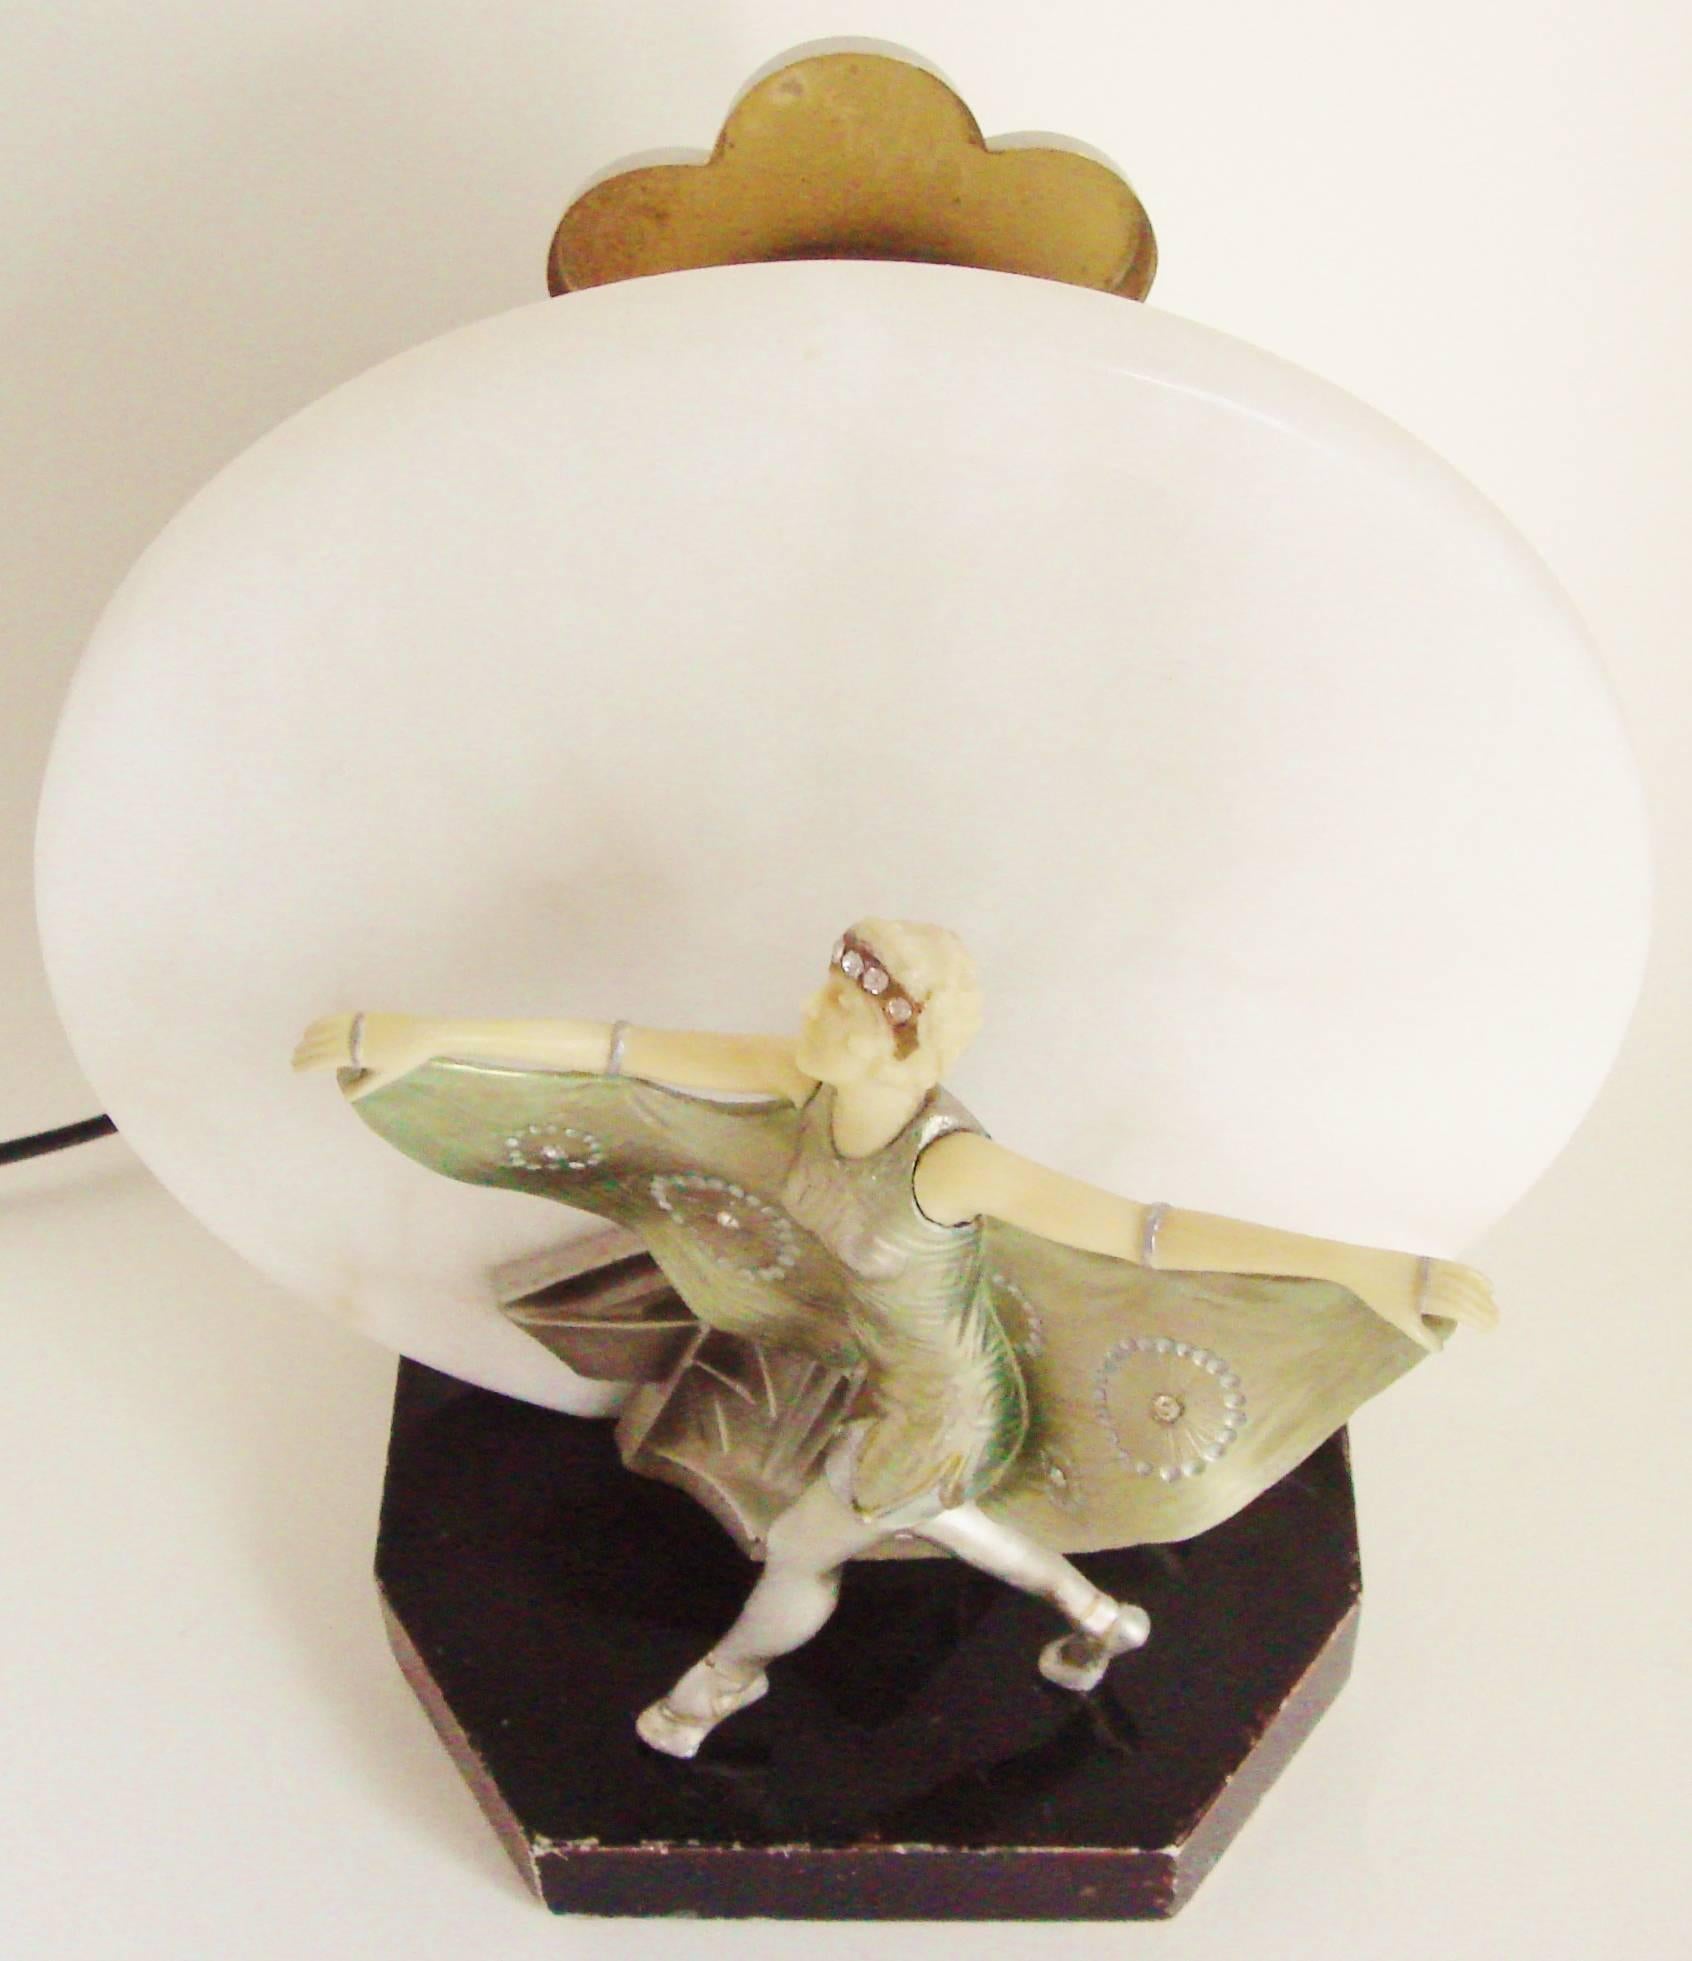 This beautiful and rare French Art Deco figural accent lamp is from a design by Gerda Iro Gottstein (Gerdago), the prolific German costume designer and sculptor (1906-2002). The subject matter is the German dancer, Niddy Impekevon, in her costume